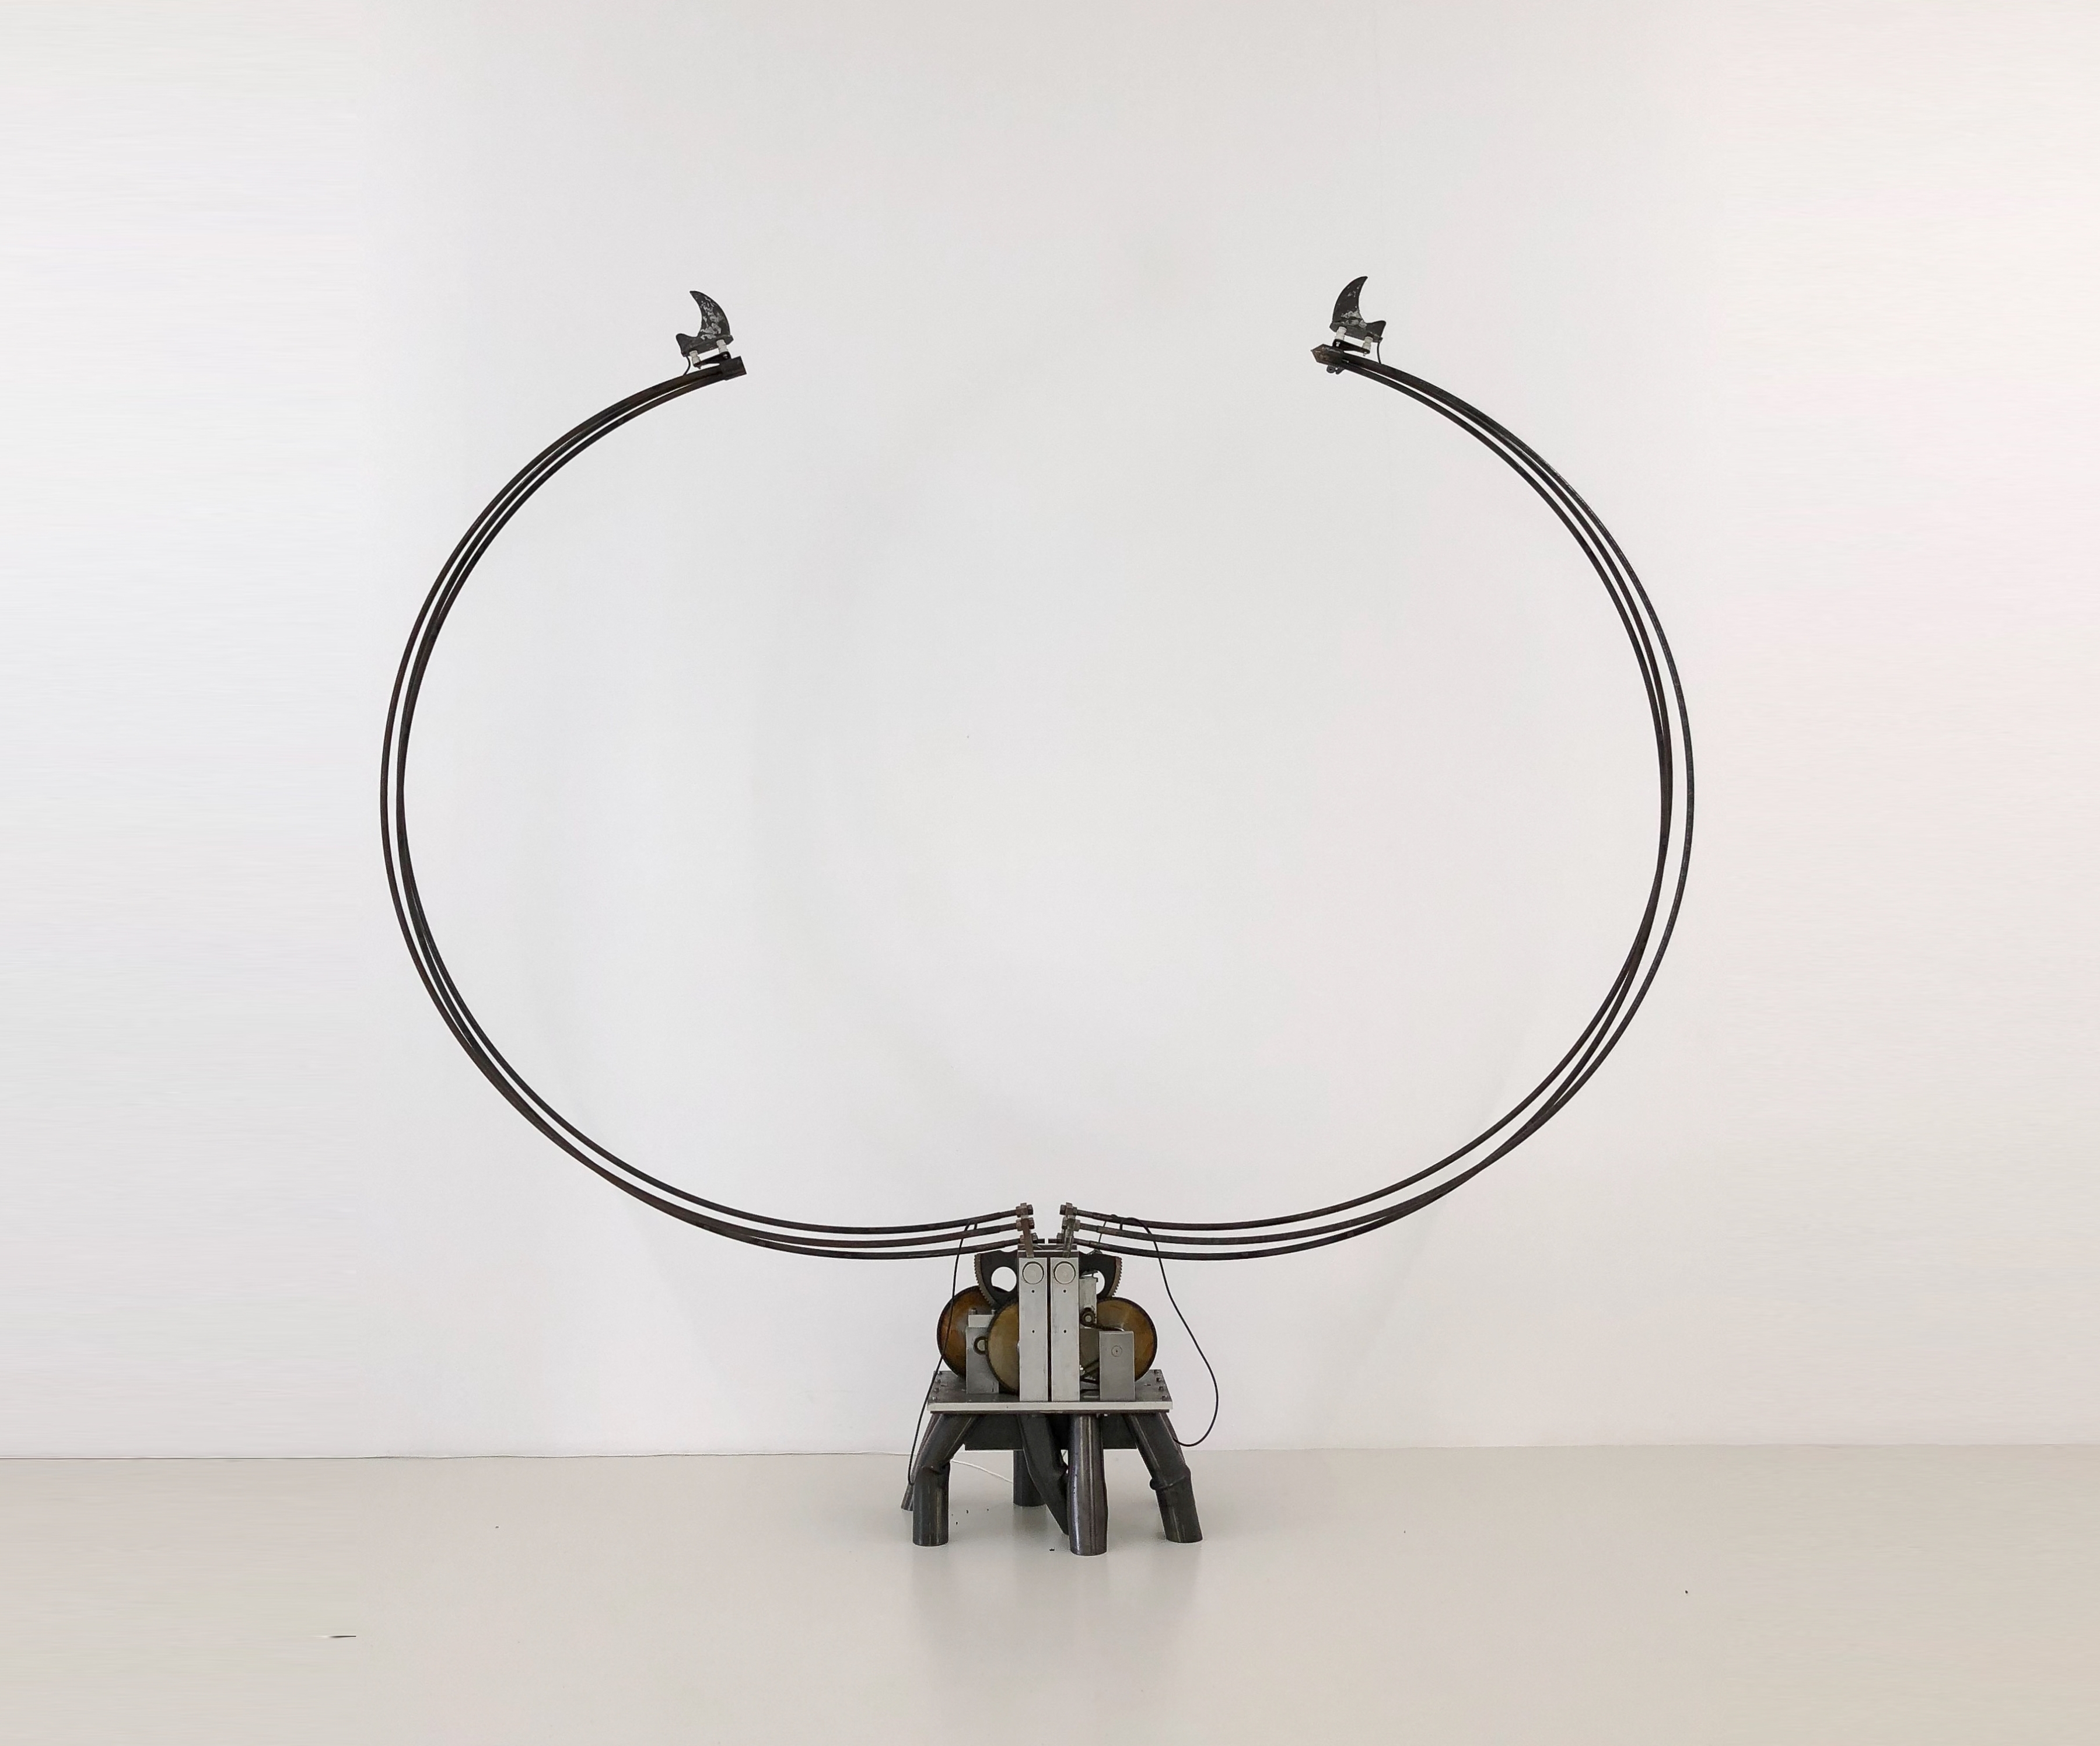 Rebecca Horn
Kiss of the Rhinoceros, 1989
Steel construction, aluminum, motors, electric devices
Dimensions: 153 1/2 x 212 1/2 x 19 3/16 inches&amp;nbsp;(390 x 540 x 60 cm)
Photography: Rebecca Horn Workshop &amp;copy;&amp;nbsp;Rebecca Horn VG Bild Kunst